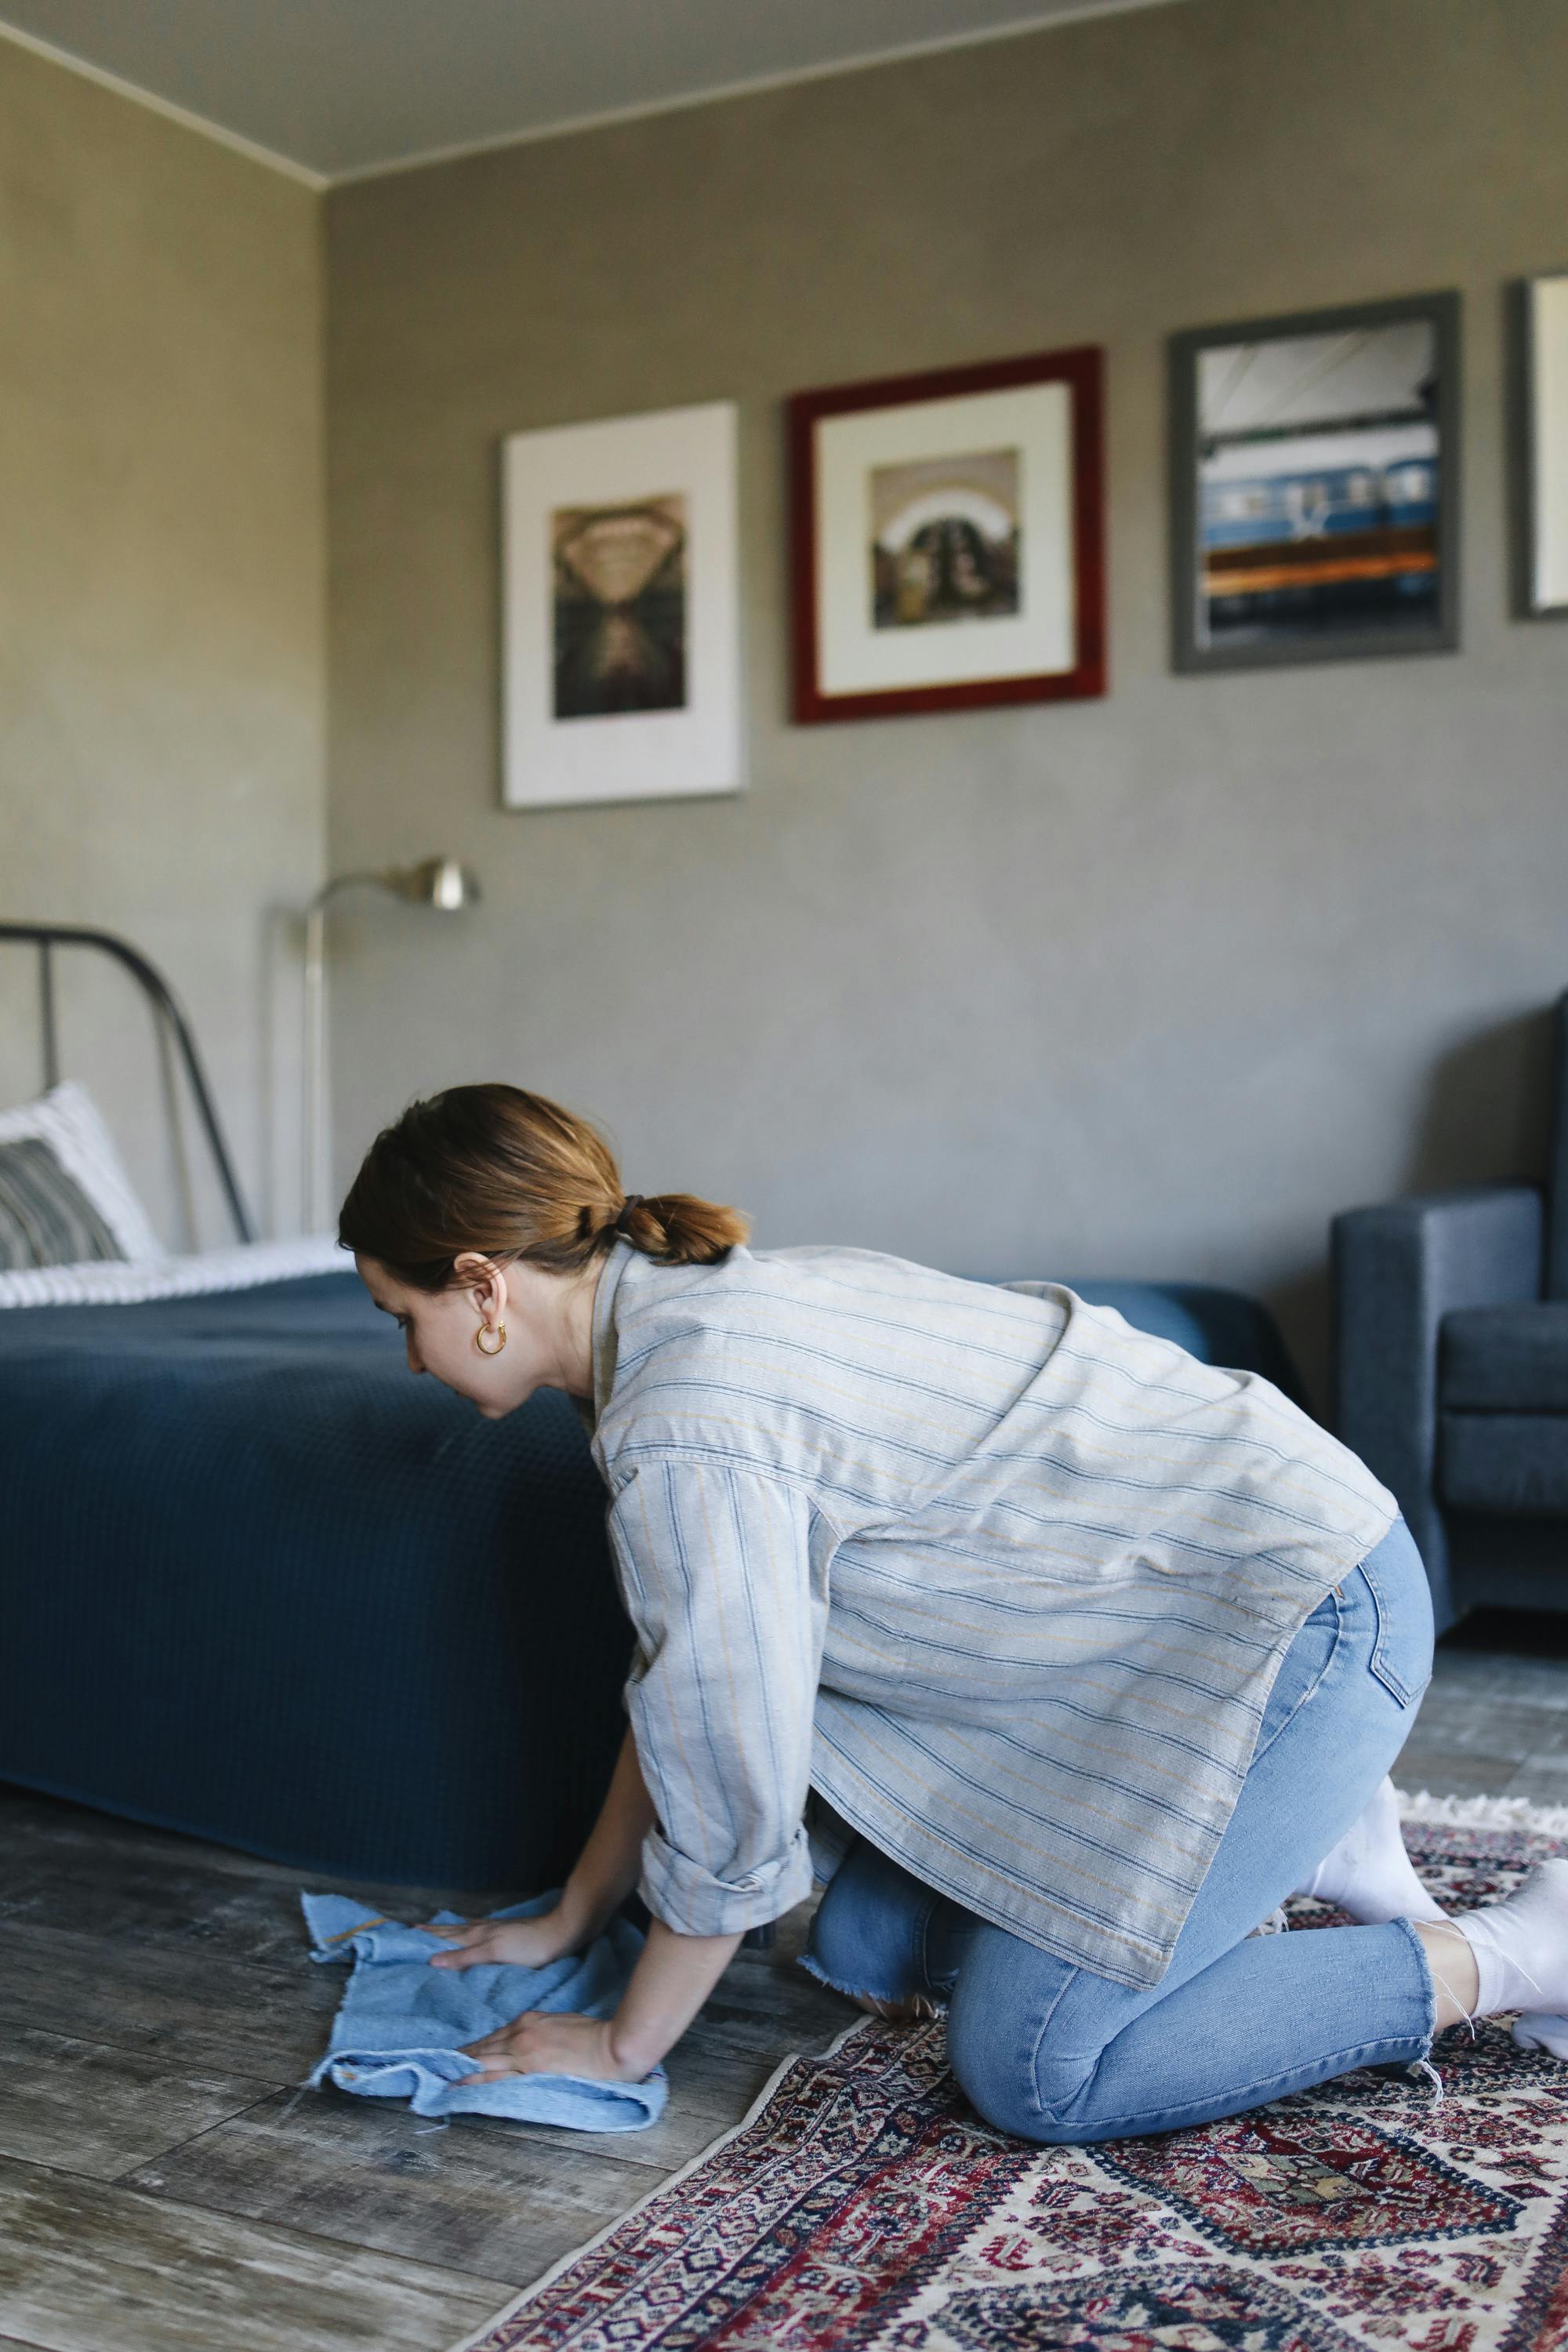 A woman cleaning the floor next to a carpet | Source: Pexels